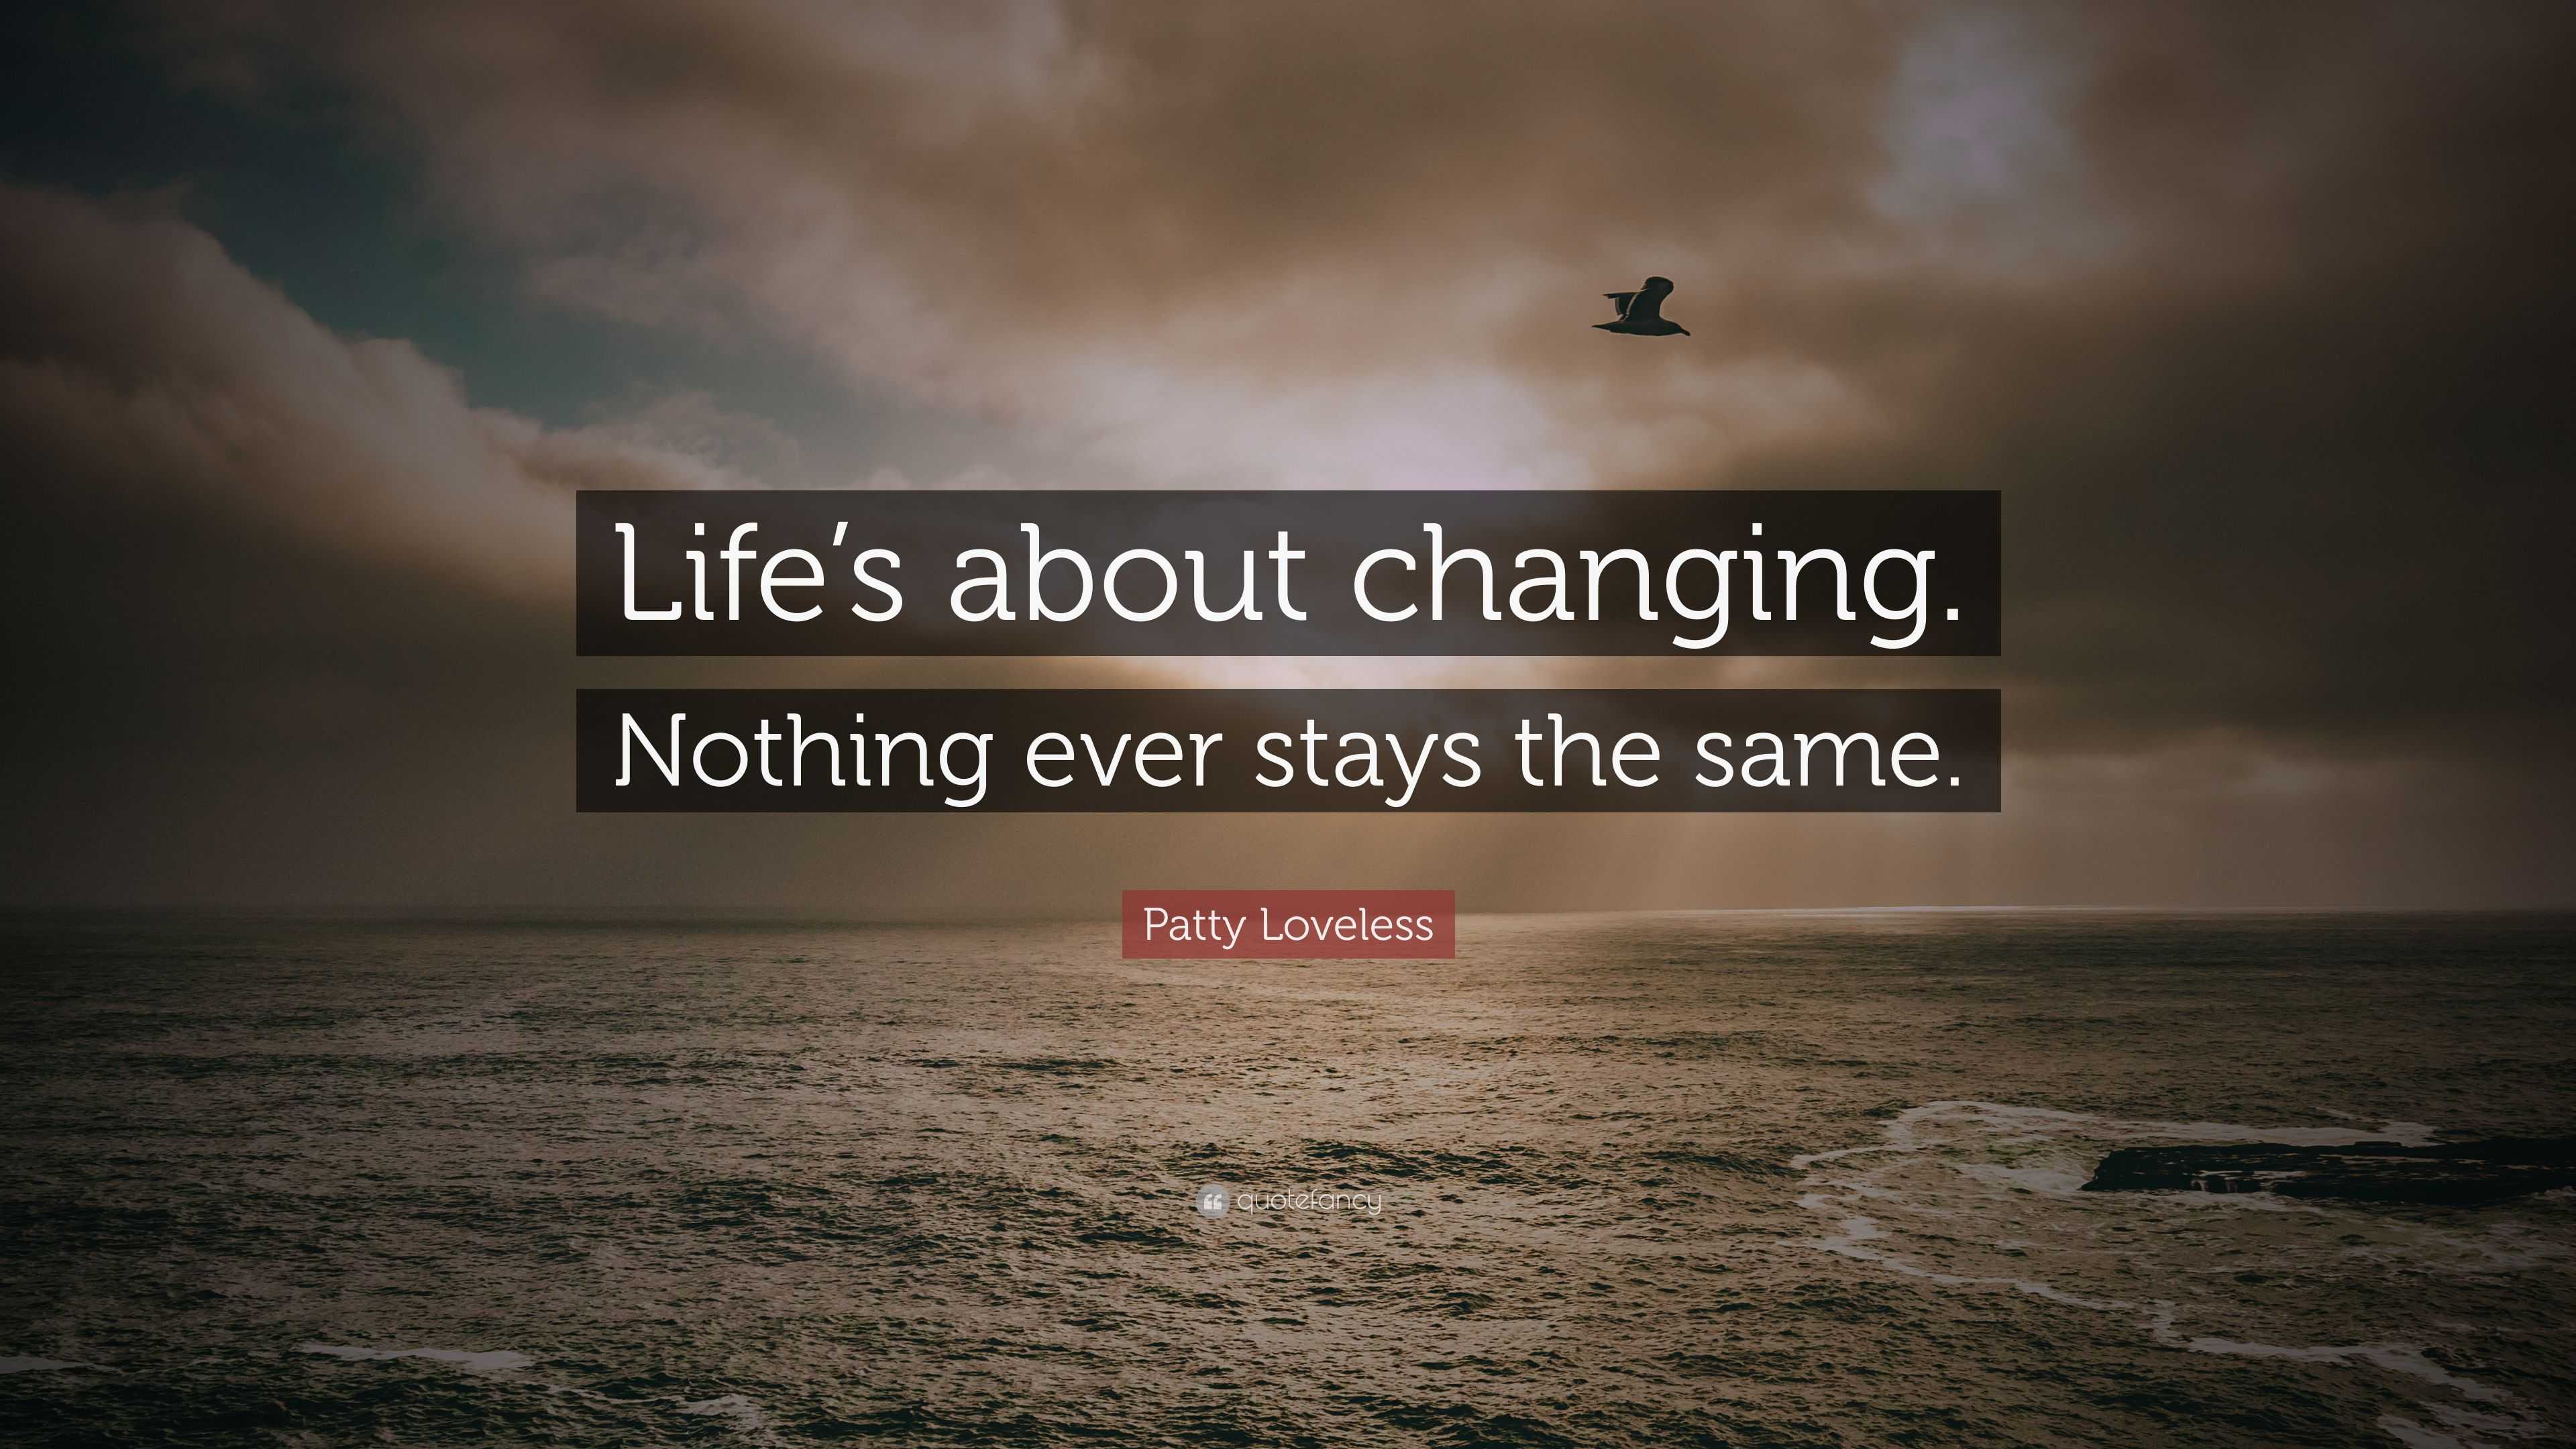 Patty Loveless Quote Lifes About Changing Nothing Ever Stays The Same